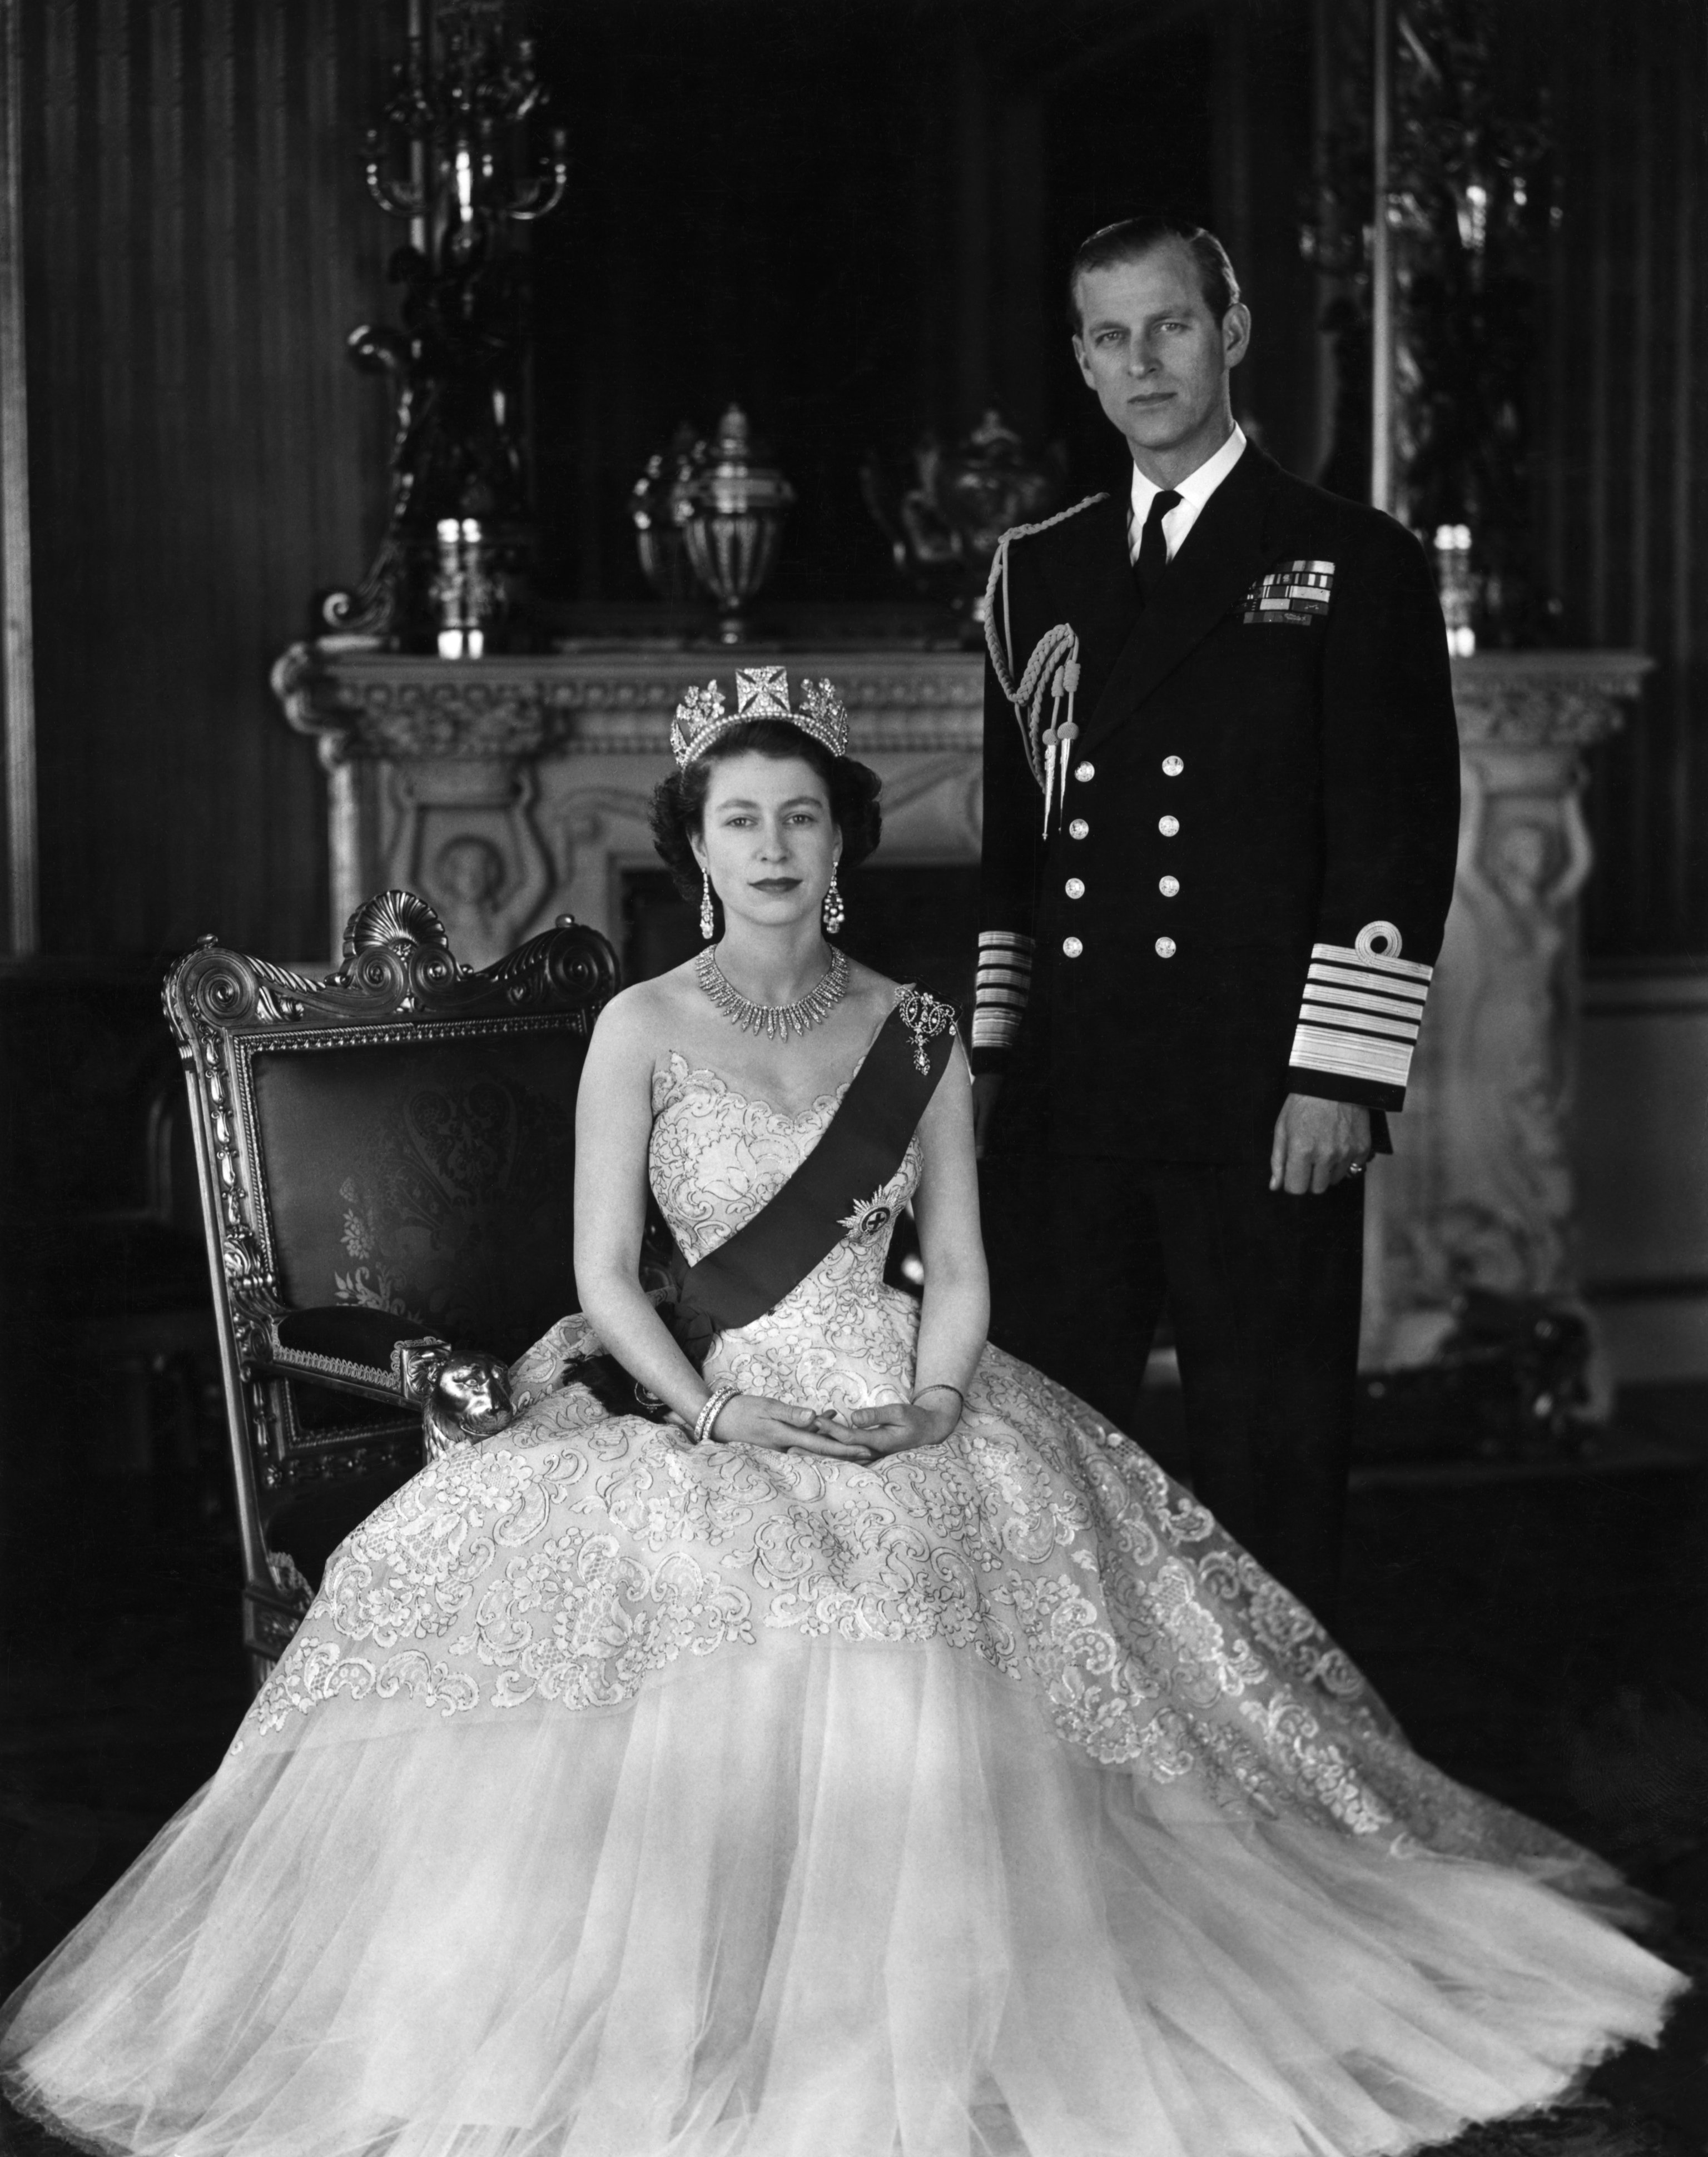 Queen Elizabeth II and Prince Phillip. She is seated and wearing a crown, he is standing in uniform. | Source: Getty Images